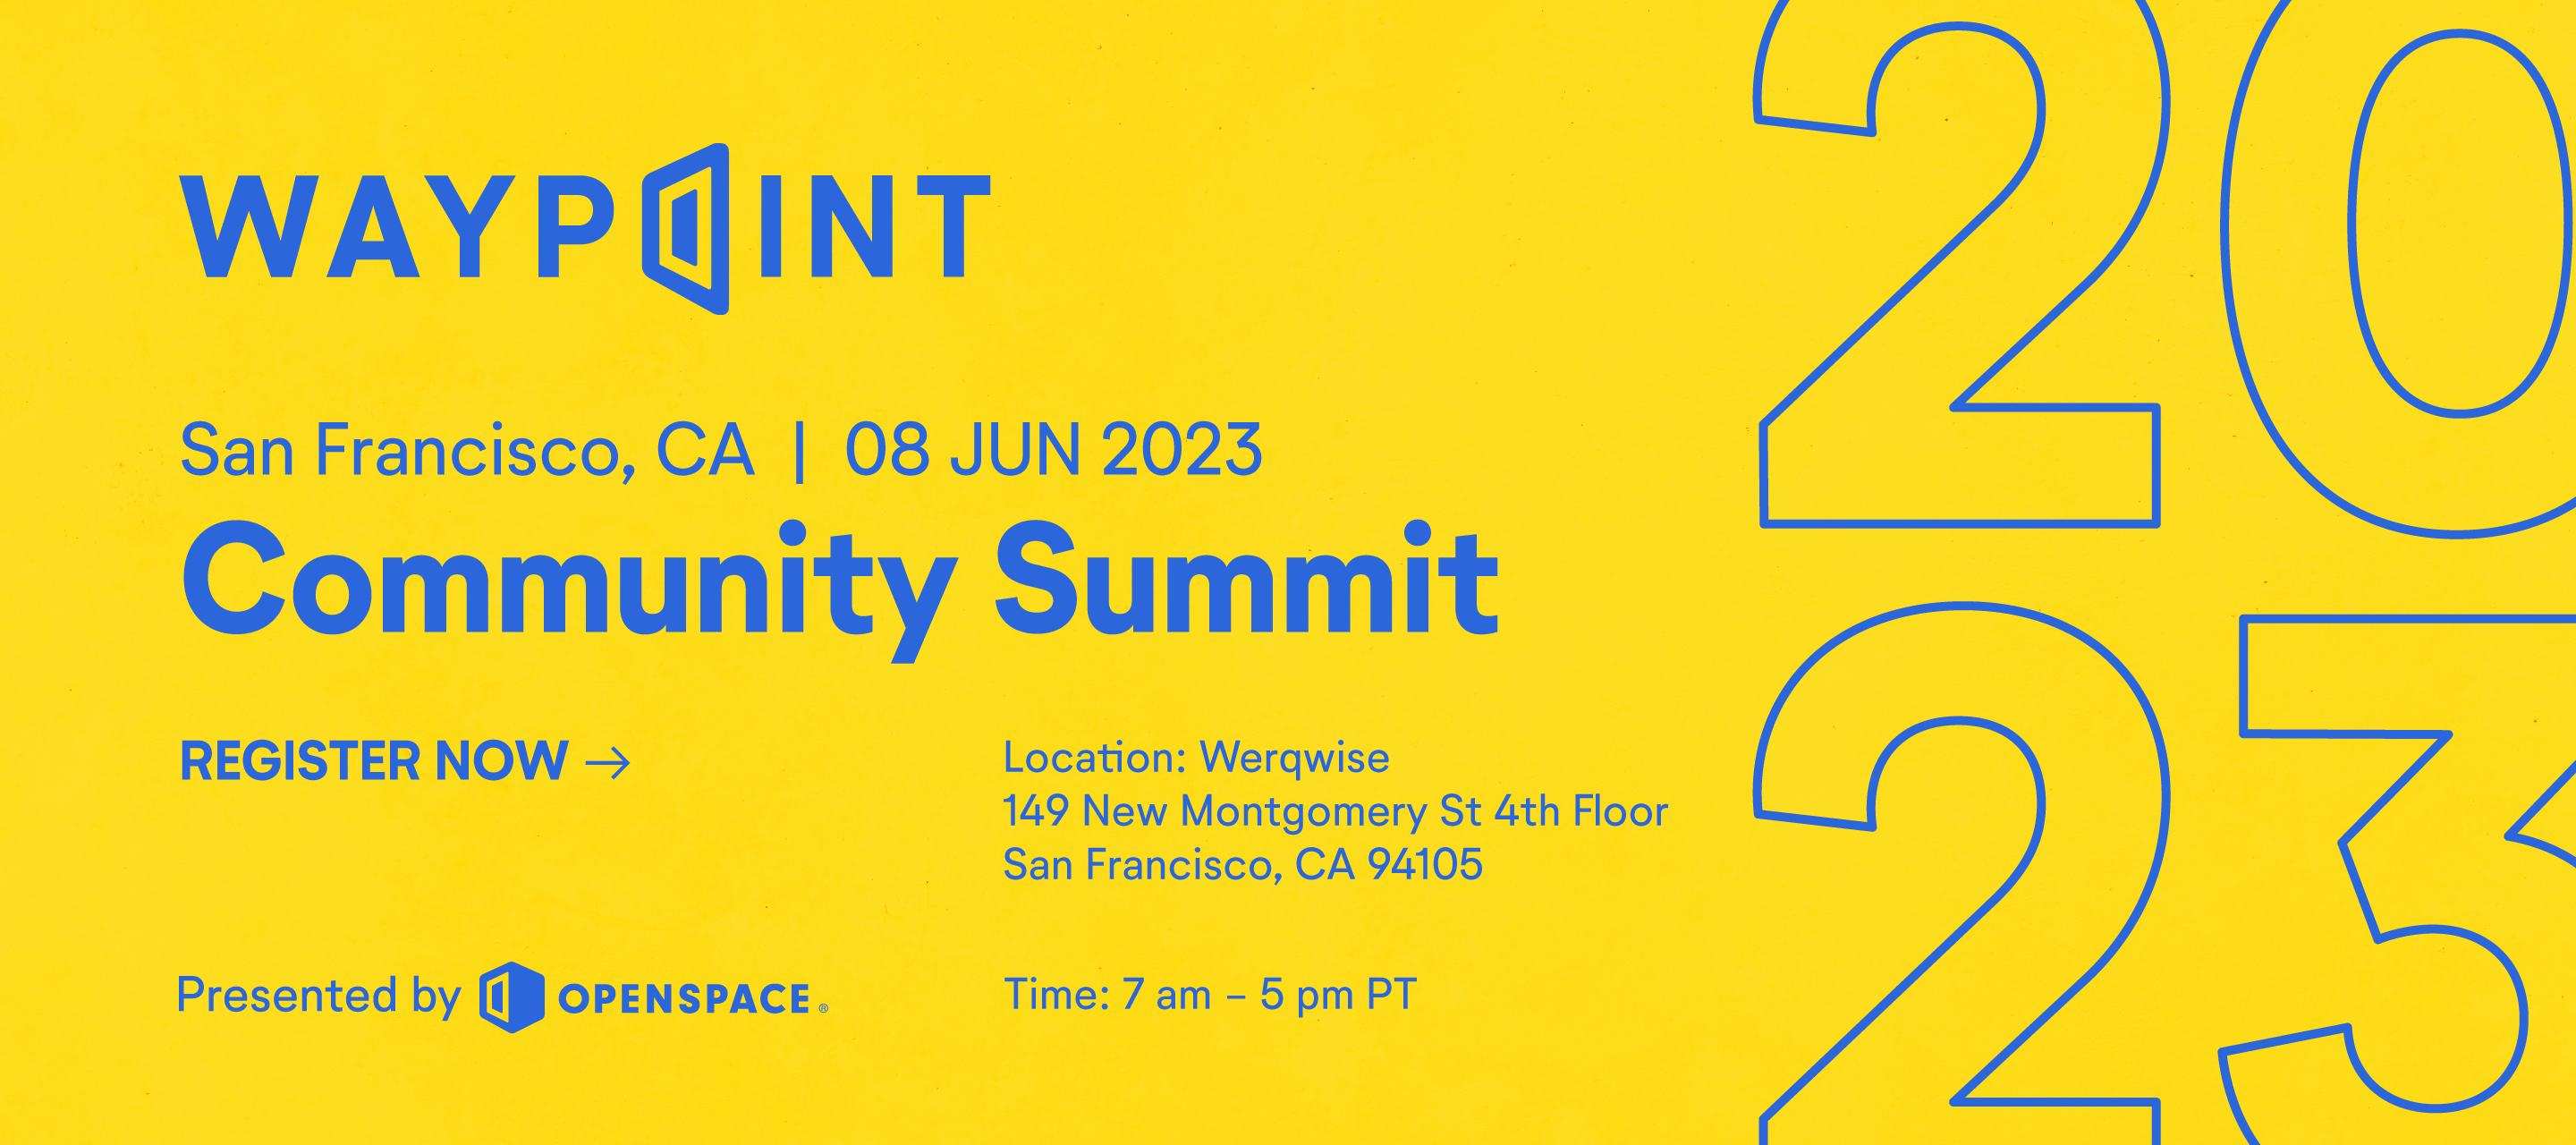 You're Invited to Our In-Person Waypoint Community Summit!